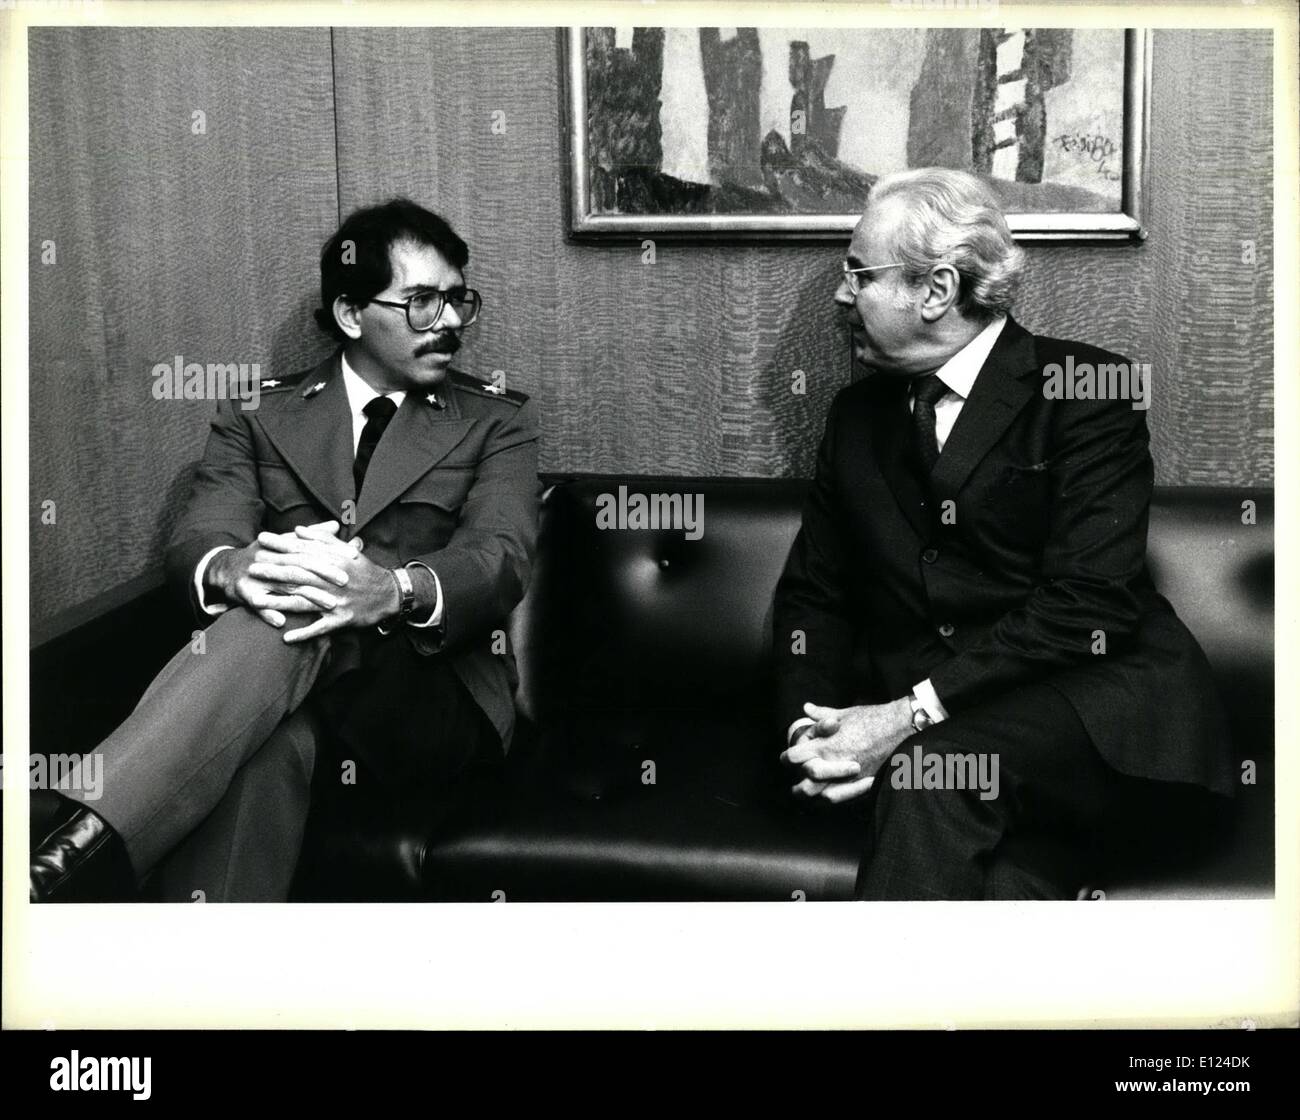 Oct. 10, 1984 - Secretary General meets with head of State of Nicaragua: Secretary General Javier Perez De Cuellar (left), meeting today in his office at UN Head quarters with Daniel Ortega Saavedra, head of State of Nicaragua. Stock Photo